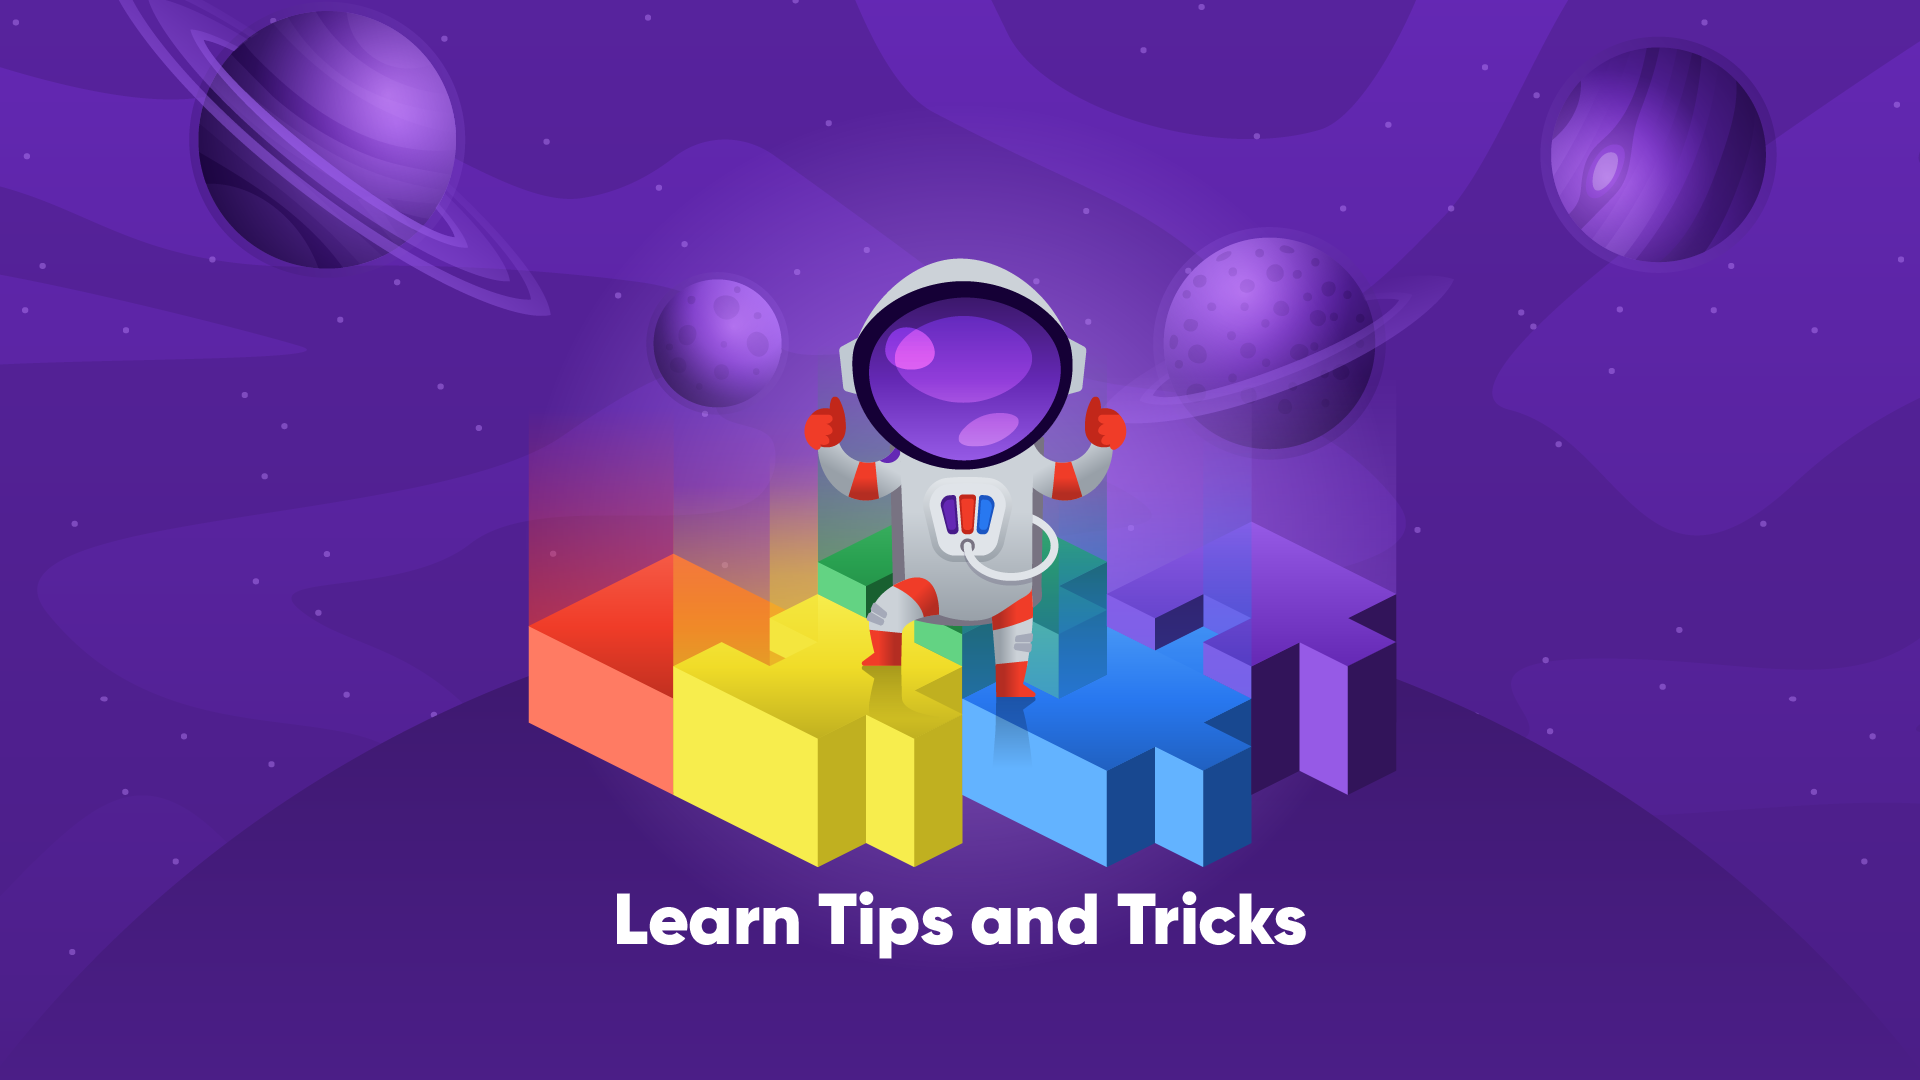 Learn Tips and Tricks's image